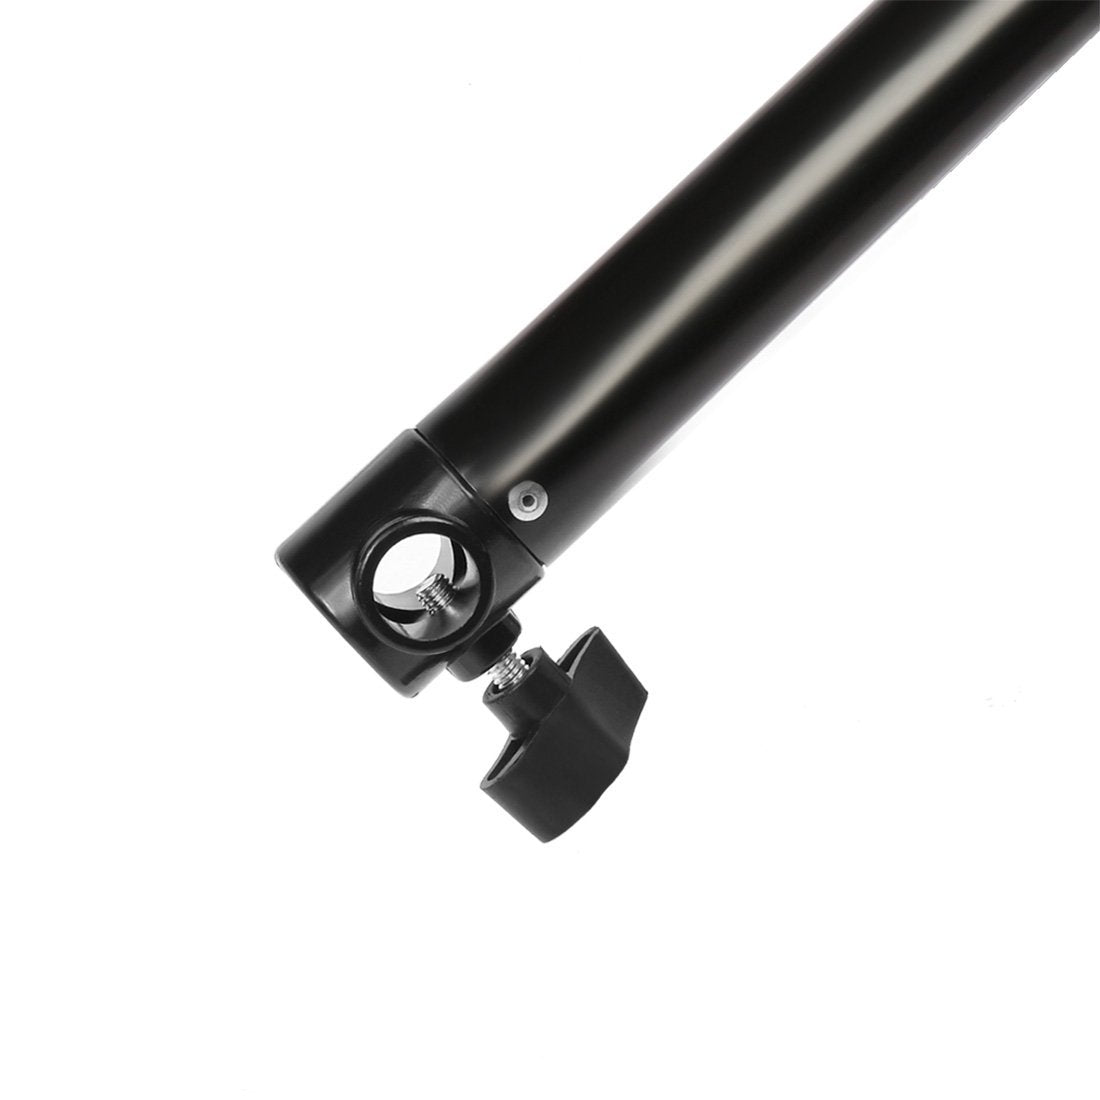 Pxel LS300CMTB 300cm Telescopic Bar Crossbar with 3 Sections Twist Locking Background Support Cross Arm